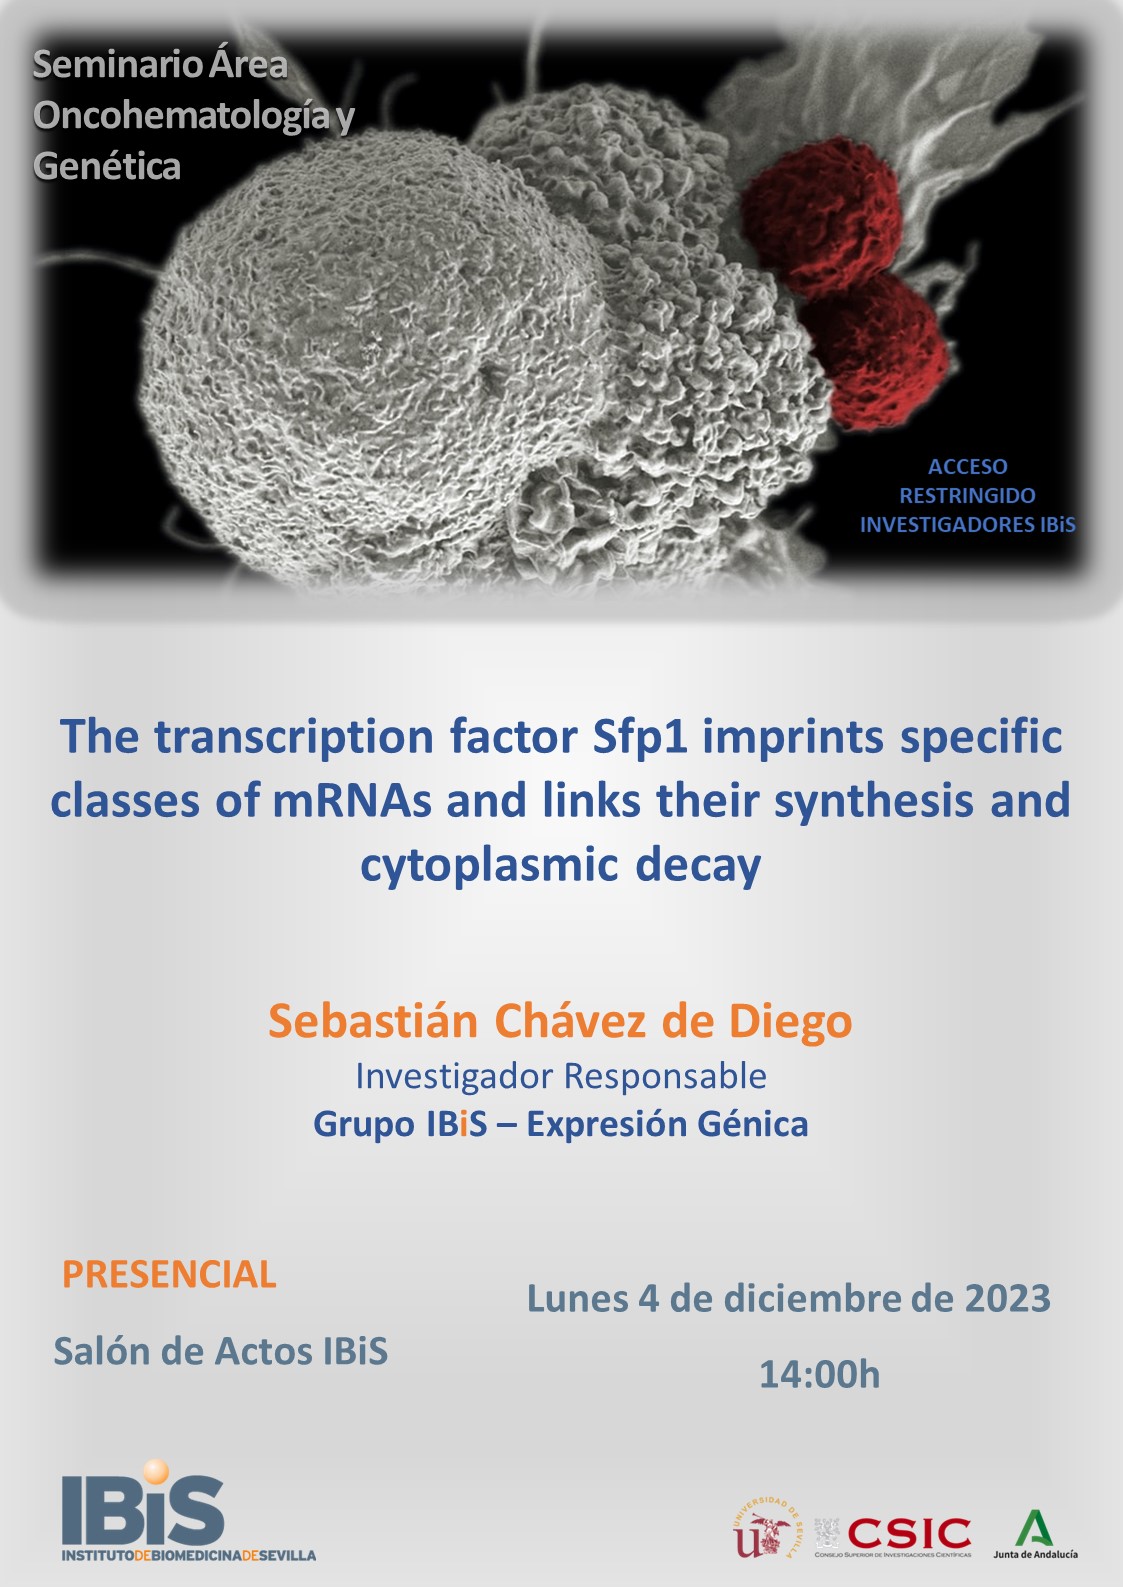 Poster: The transcription factor Sfp1 imprints specific classes of mRNAs and links their synthesis and cytoplasmic decay